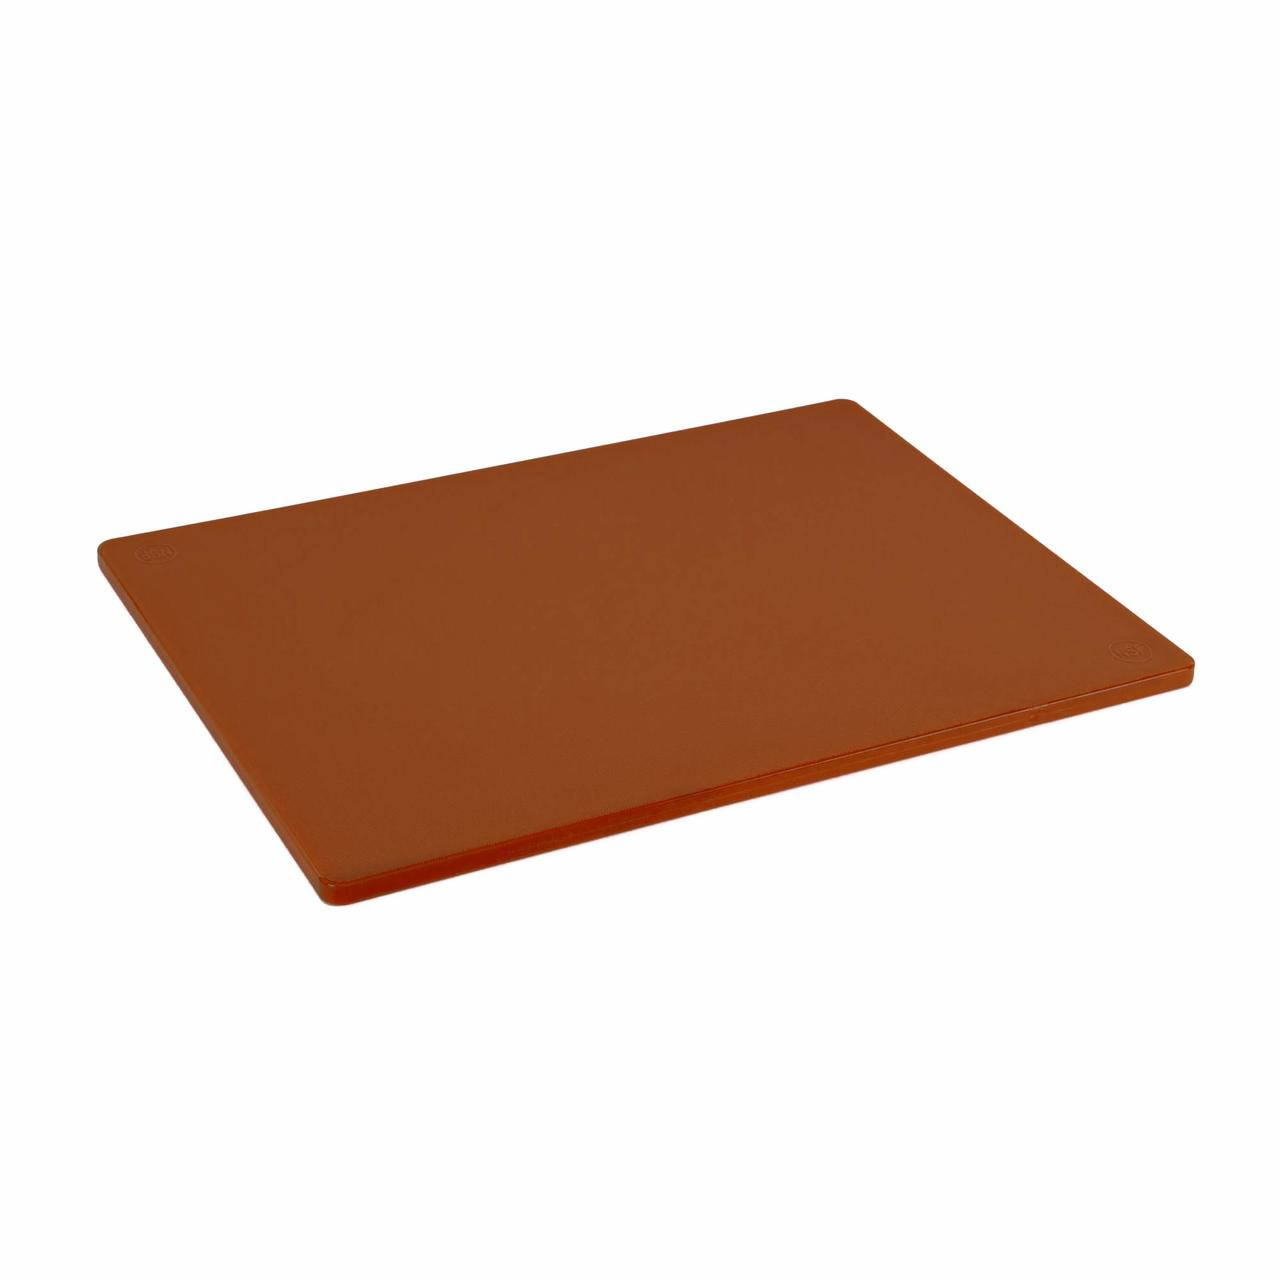 12 x 18 Flexible Cutting Boards, Pack of 6